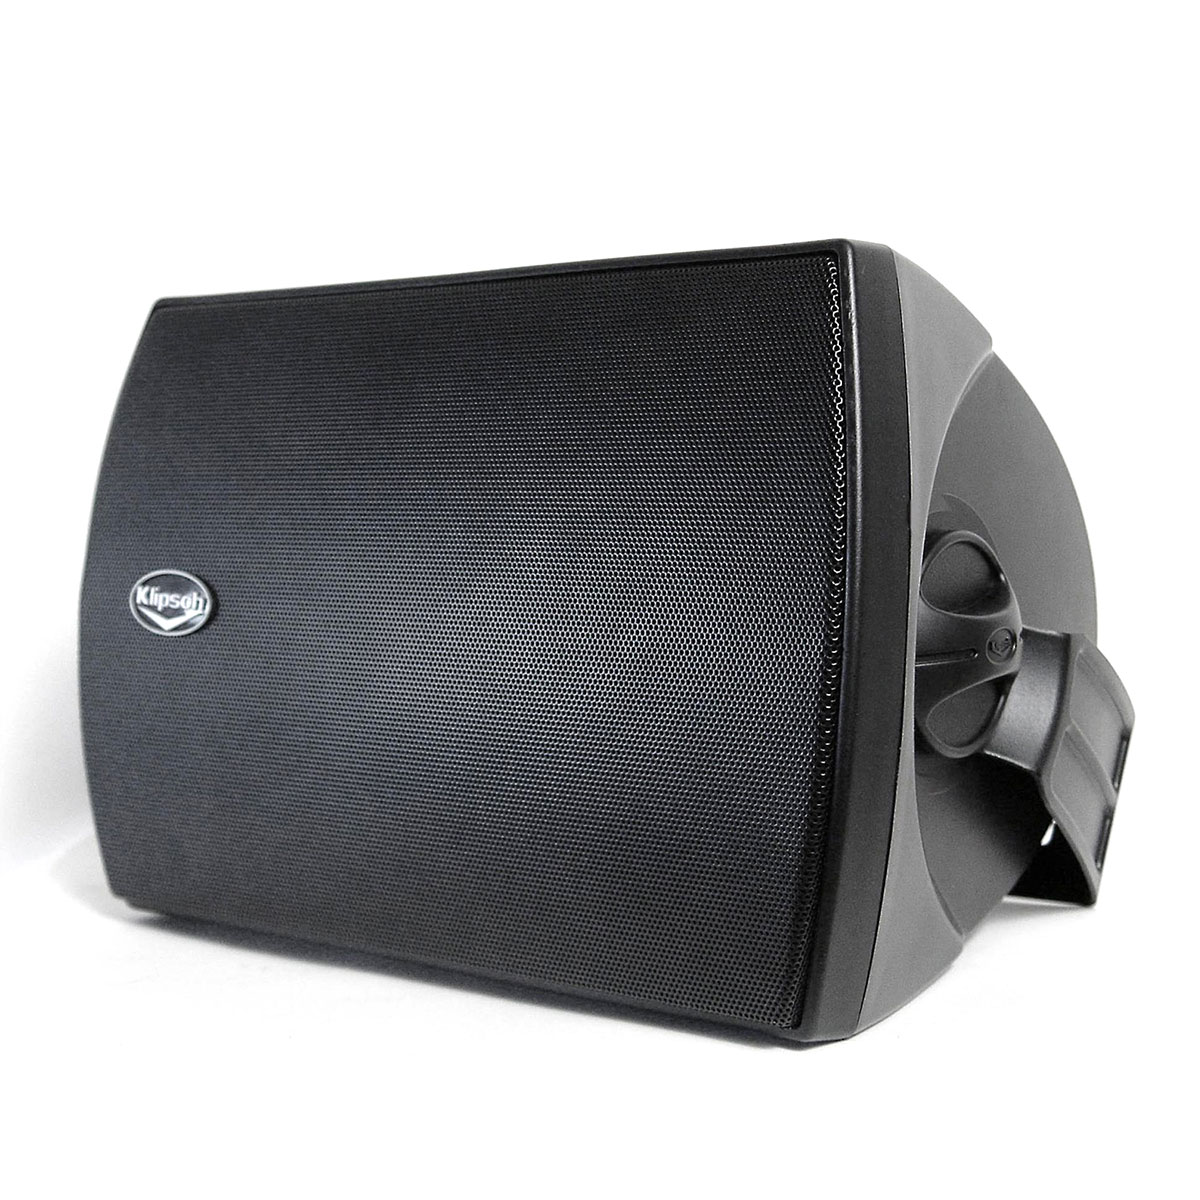 A deal on speakers you can use all year round! klipsch aw525 black